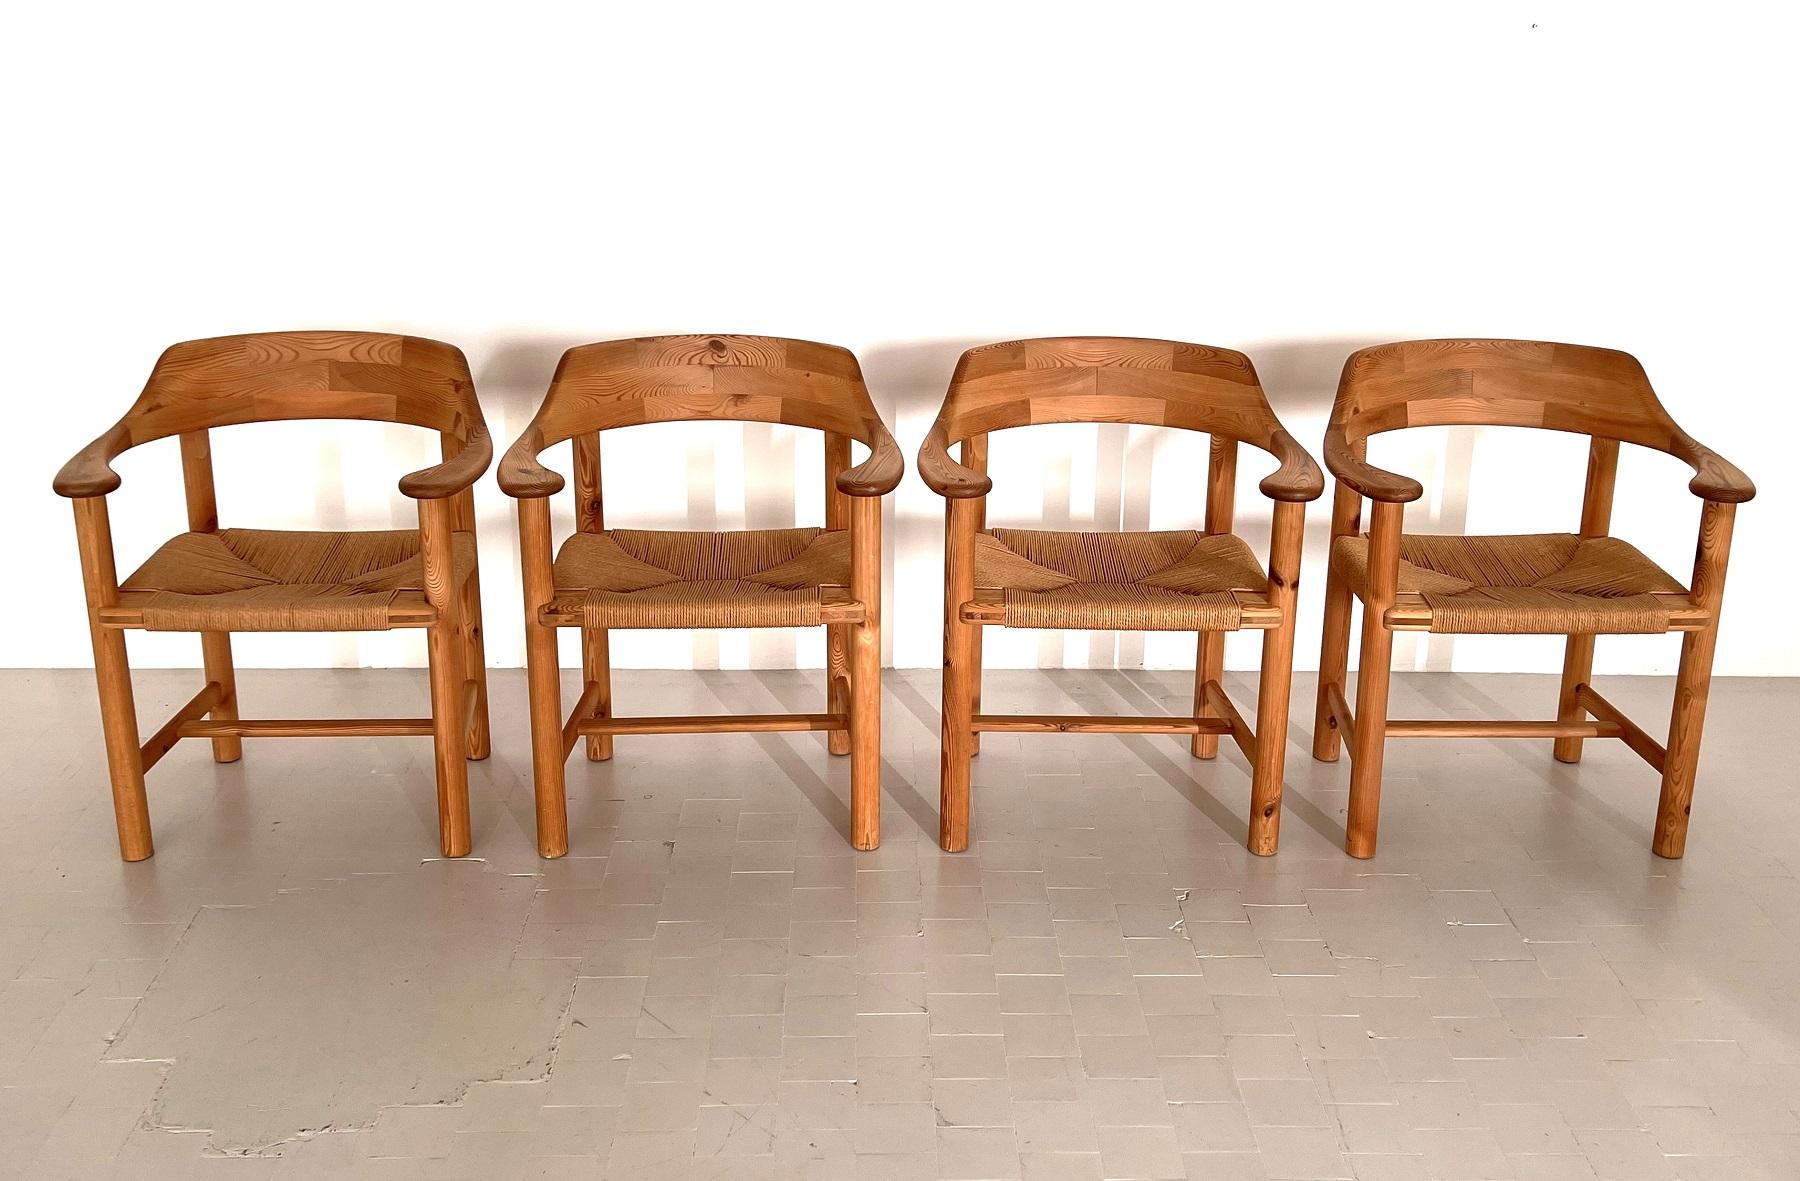 Scandinavian Modern Rainer Daumiller Dining Chairs in Pine and Paper Cord, 1970s For Sale